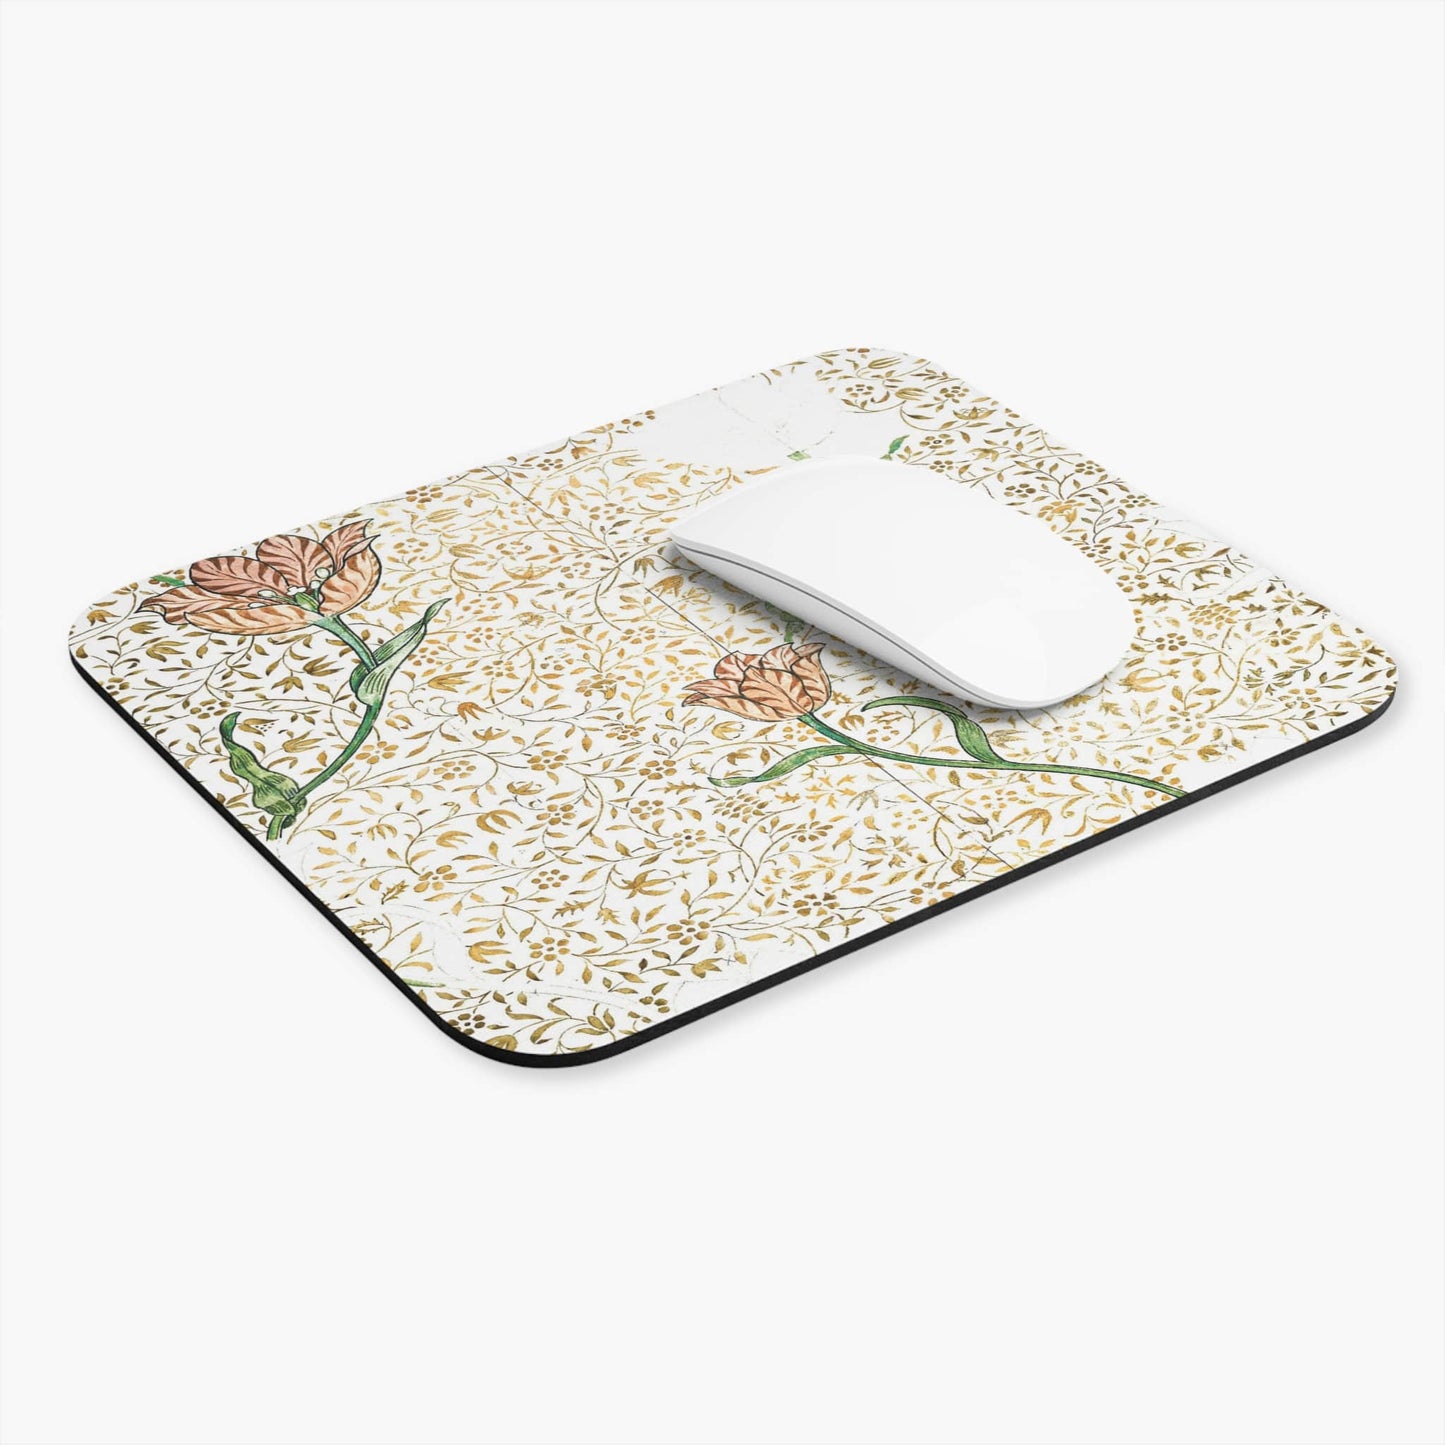 Aesthetic Floral Computer Desk Mouse Pad With White Mouse